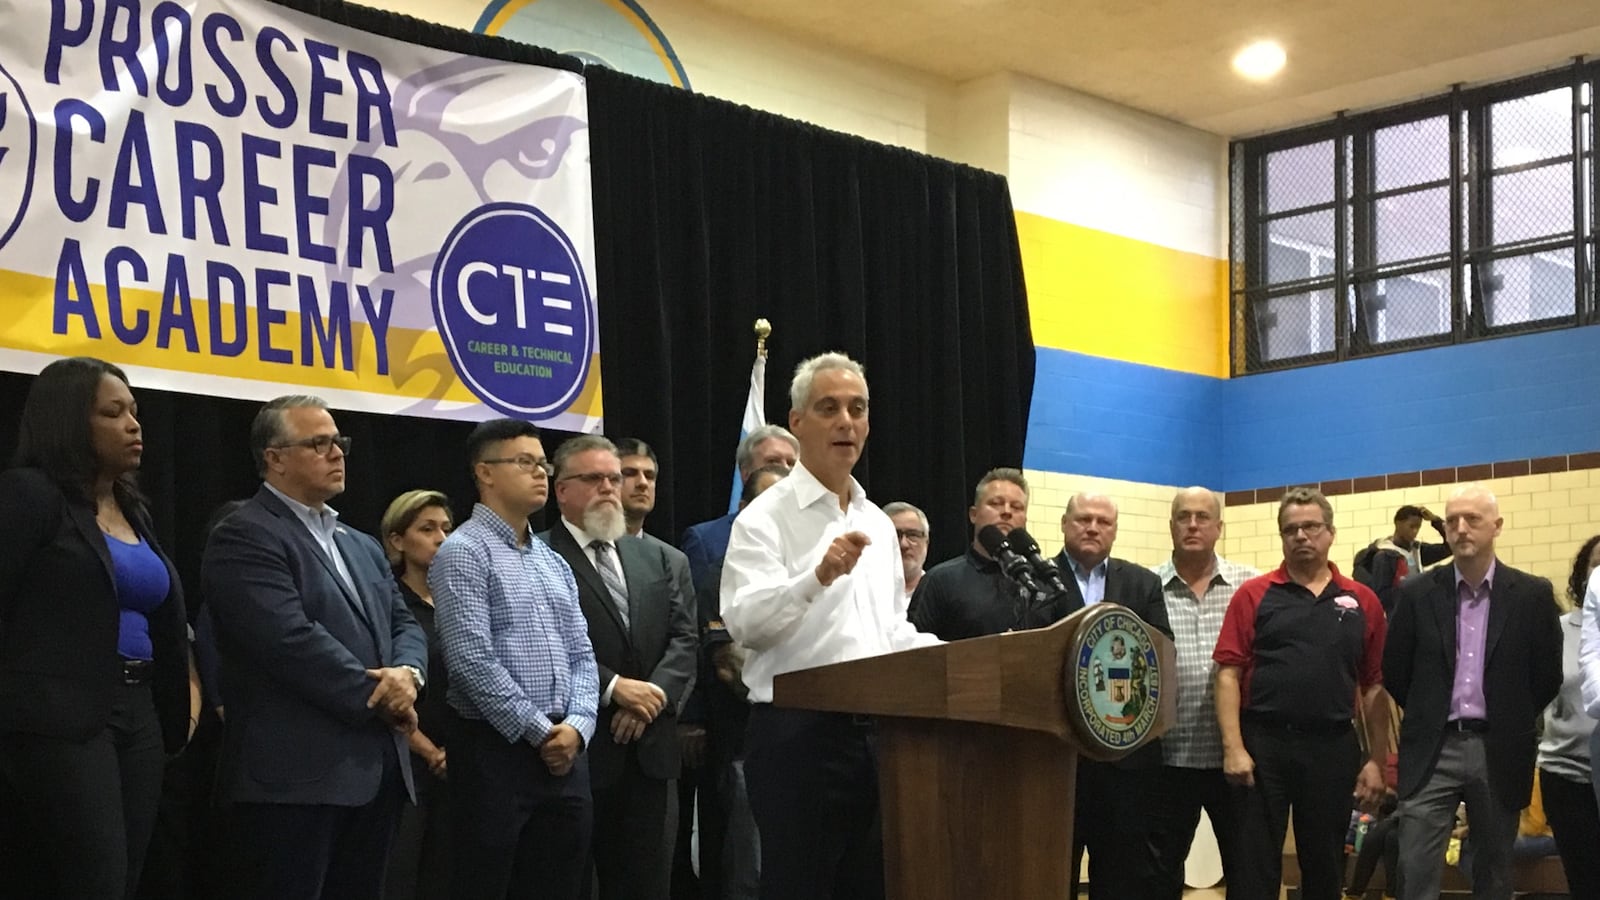 Chicago Mayor Rahm Emanuel visits Prosser Career Academy Thursday, Sept. 6, 2018, to announce a $12 million investment in vocational education.